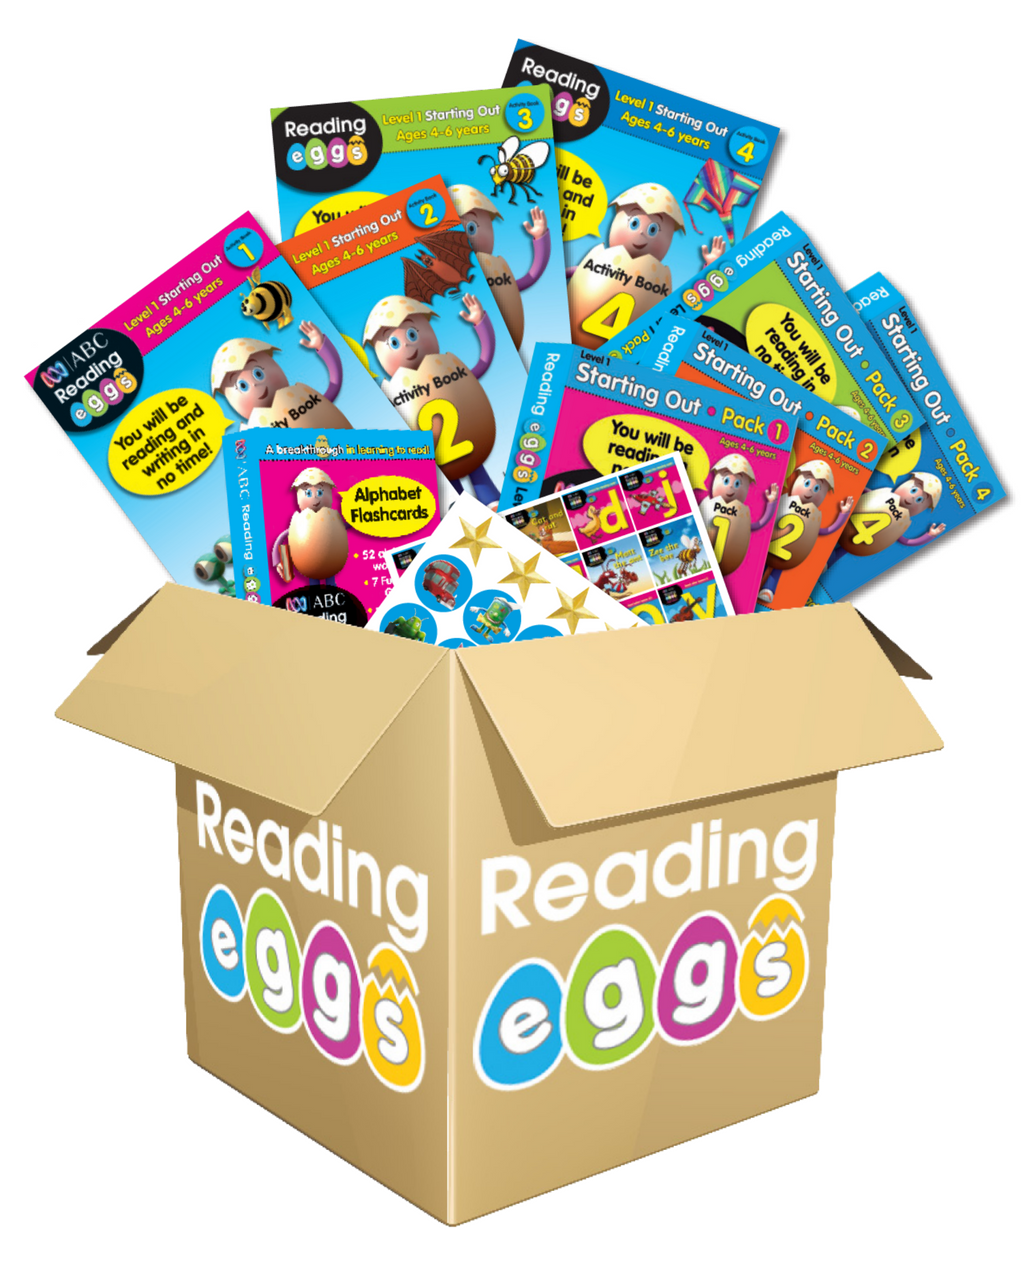 Eggs　activity　Eggs　Pack　ABC　read　Level　Reading　learn　Reading　books　Shop　Book　to